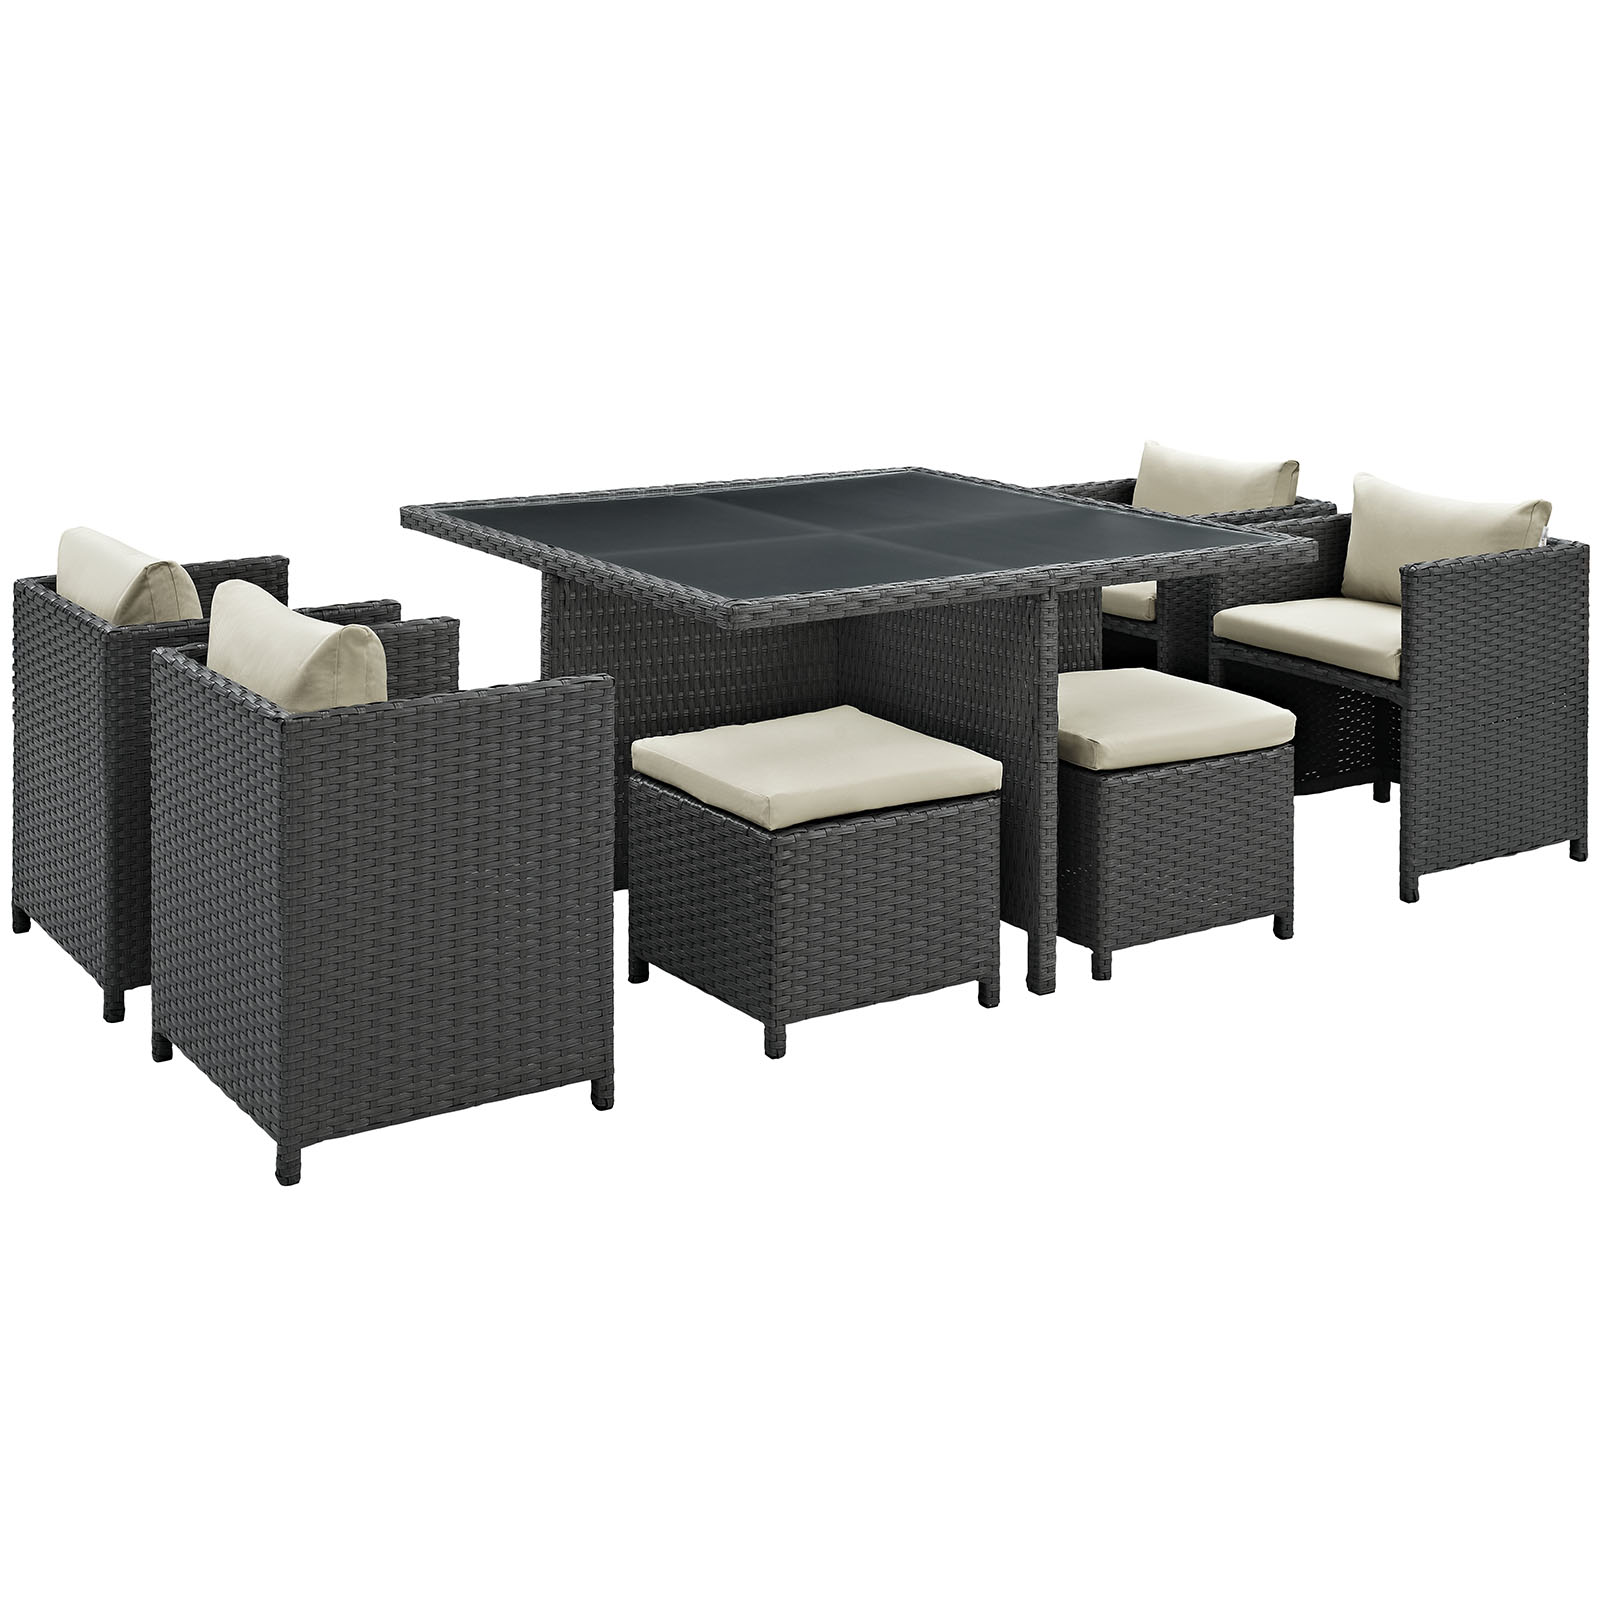 Modway Sojourn 9 Piece Outdoor Patio Sunbrella® Dining Set in Antique Canvas Beige - image 3 of 5